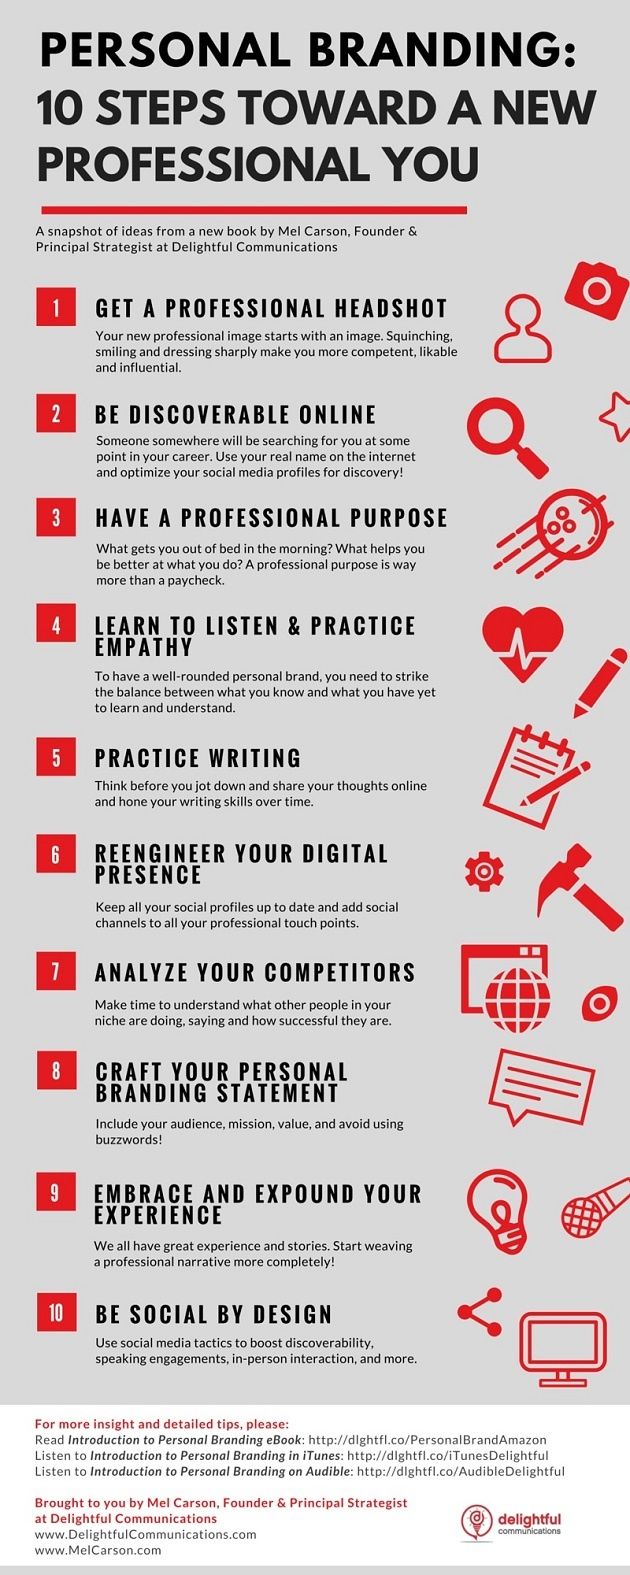 Personal Branding: 10 Steps Toward a New Professional You [Infographic]